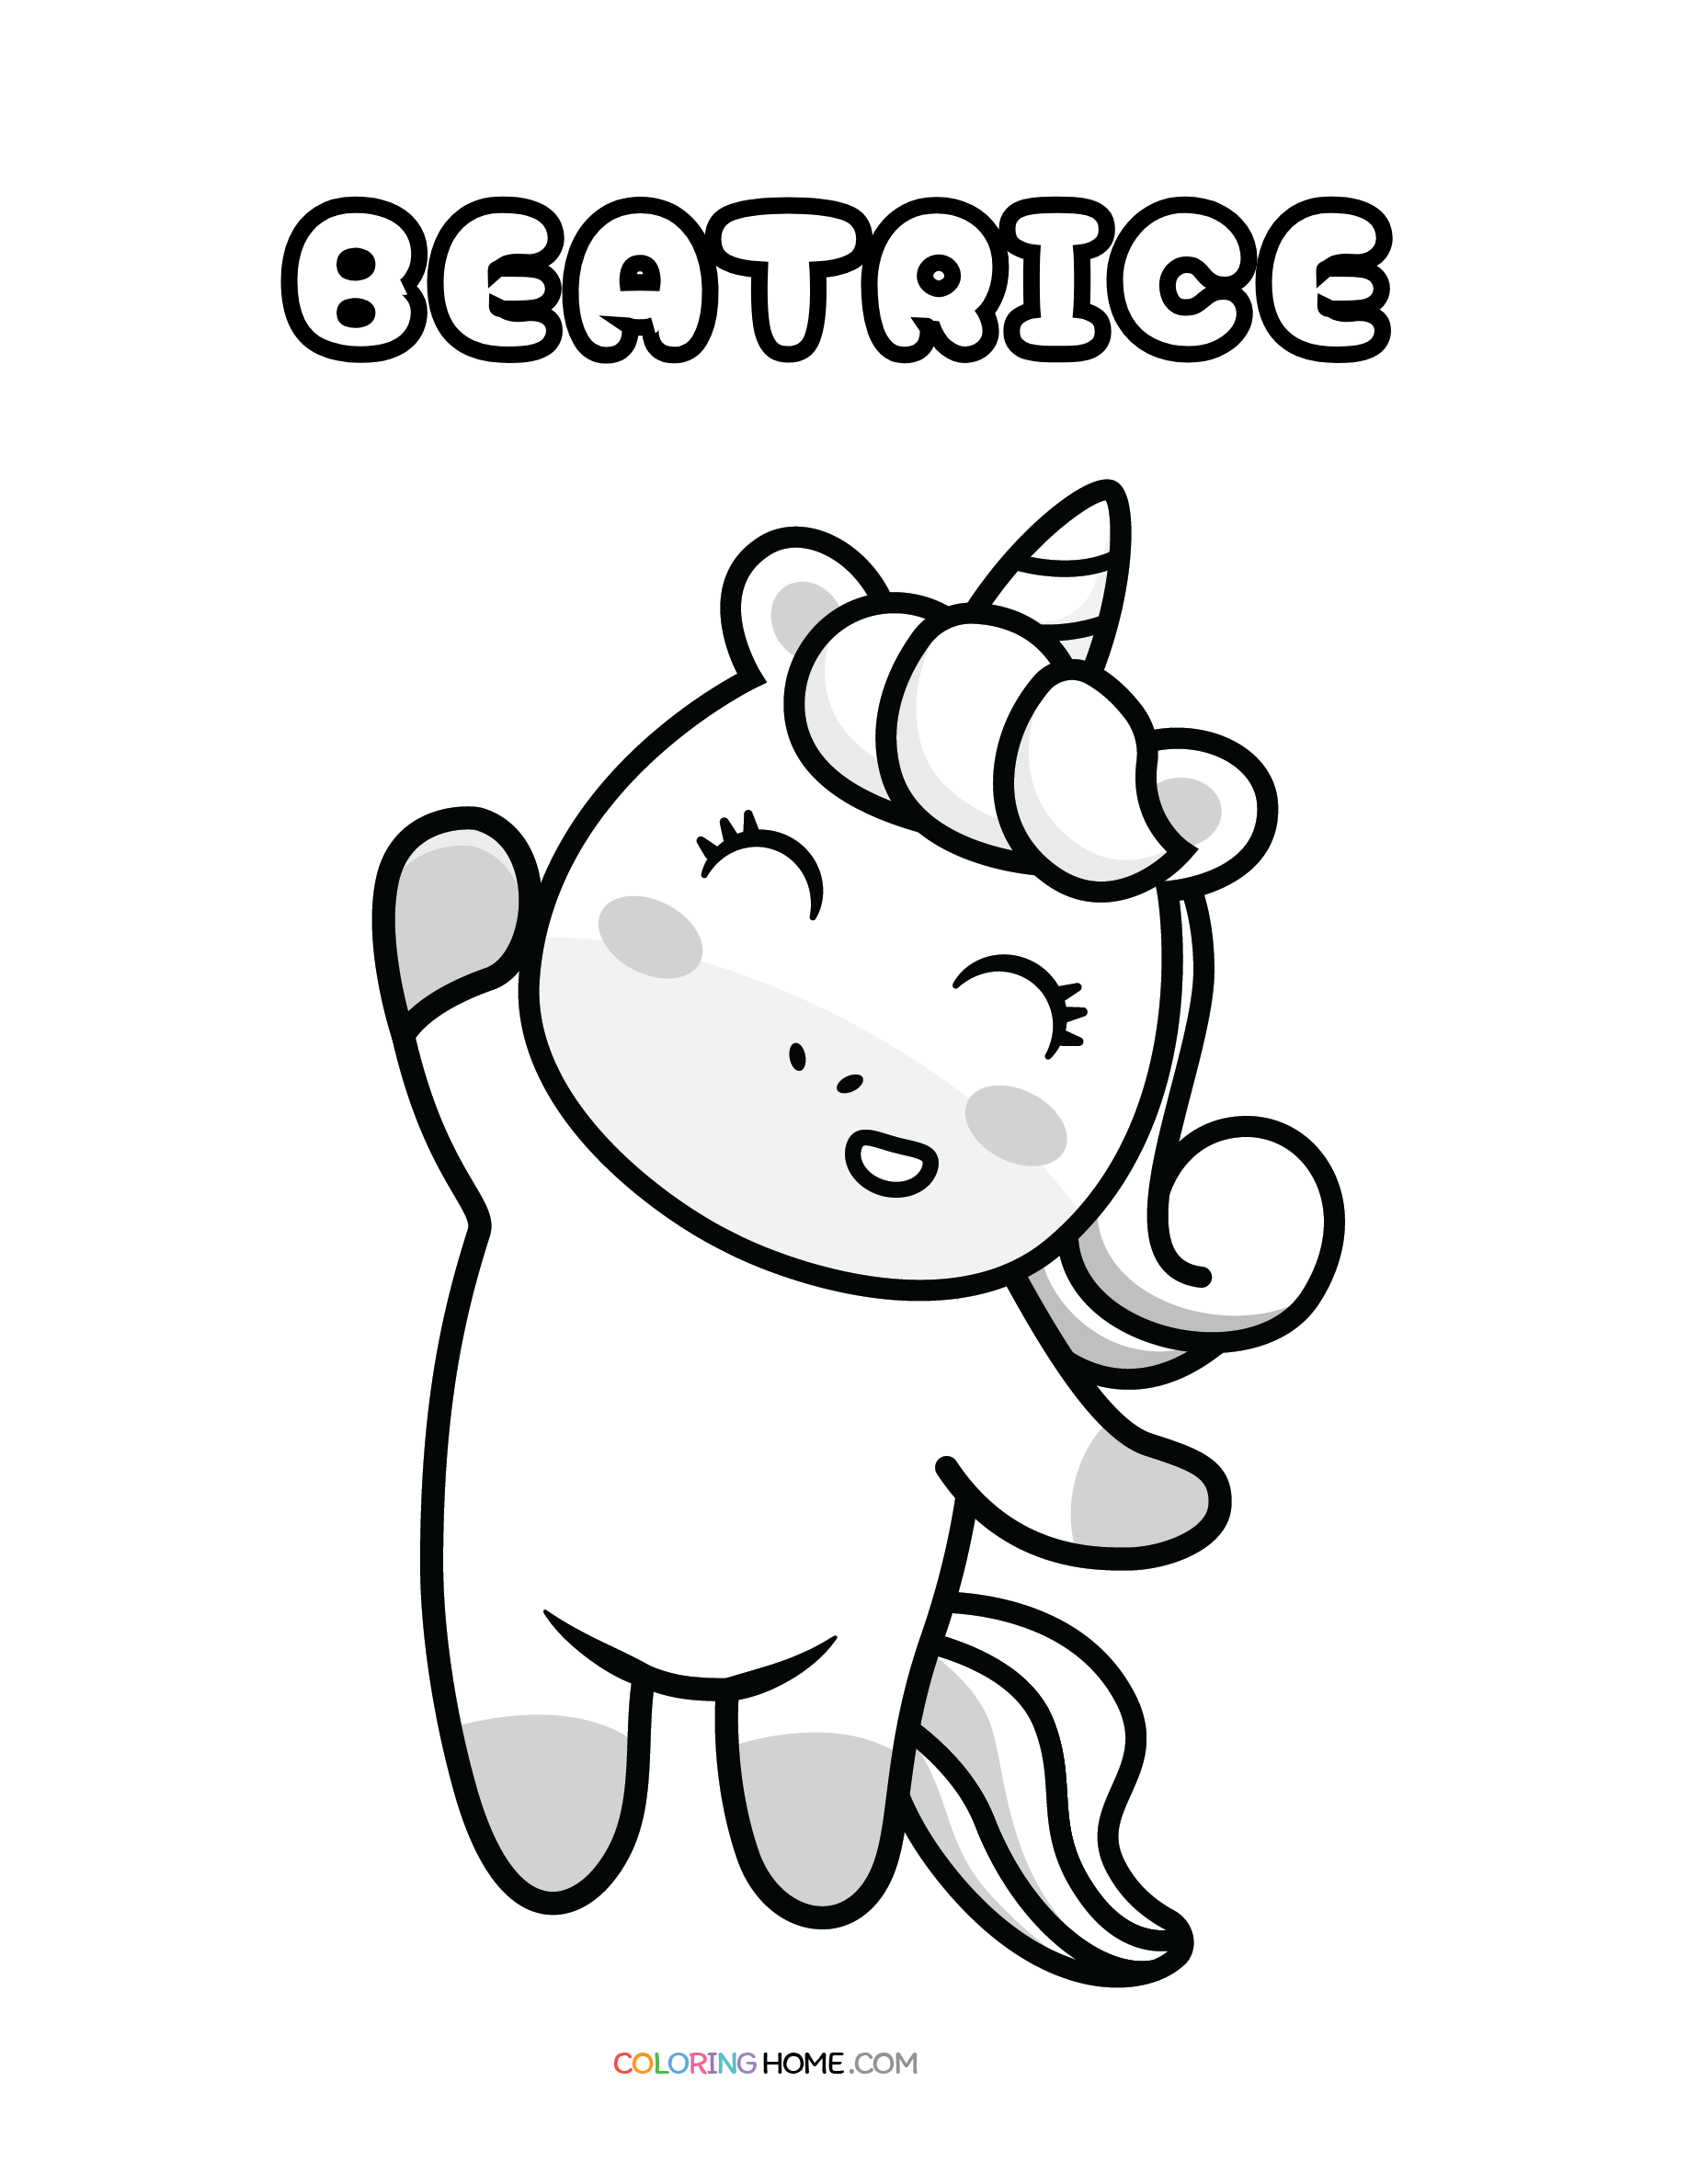 Beatrice Name Coloring Pages - Coloring Home